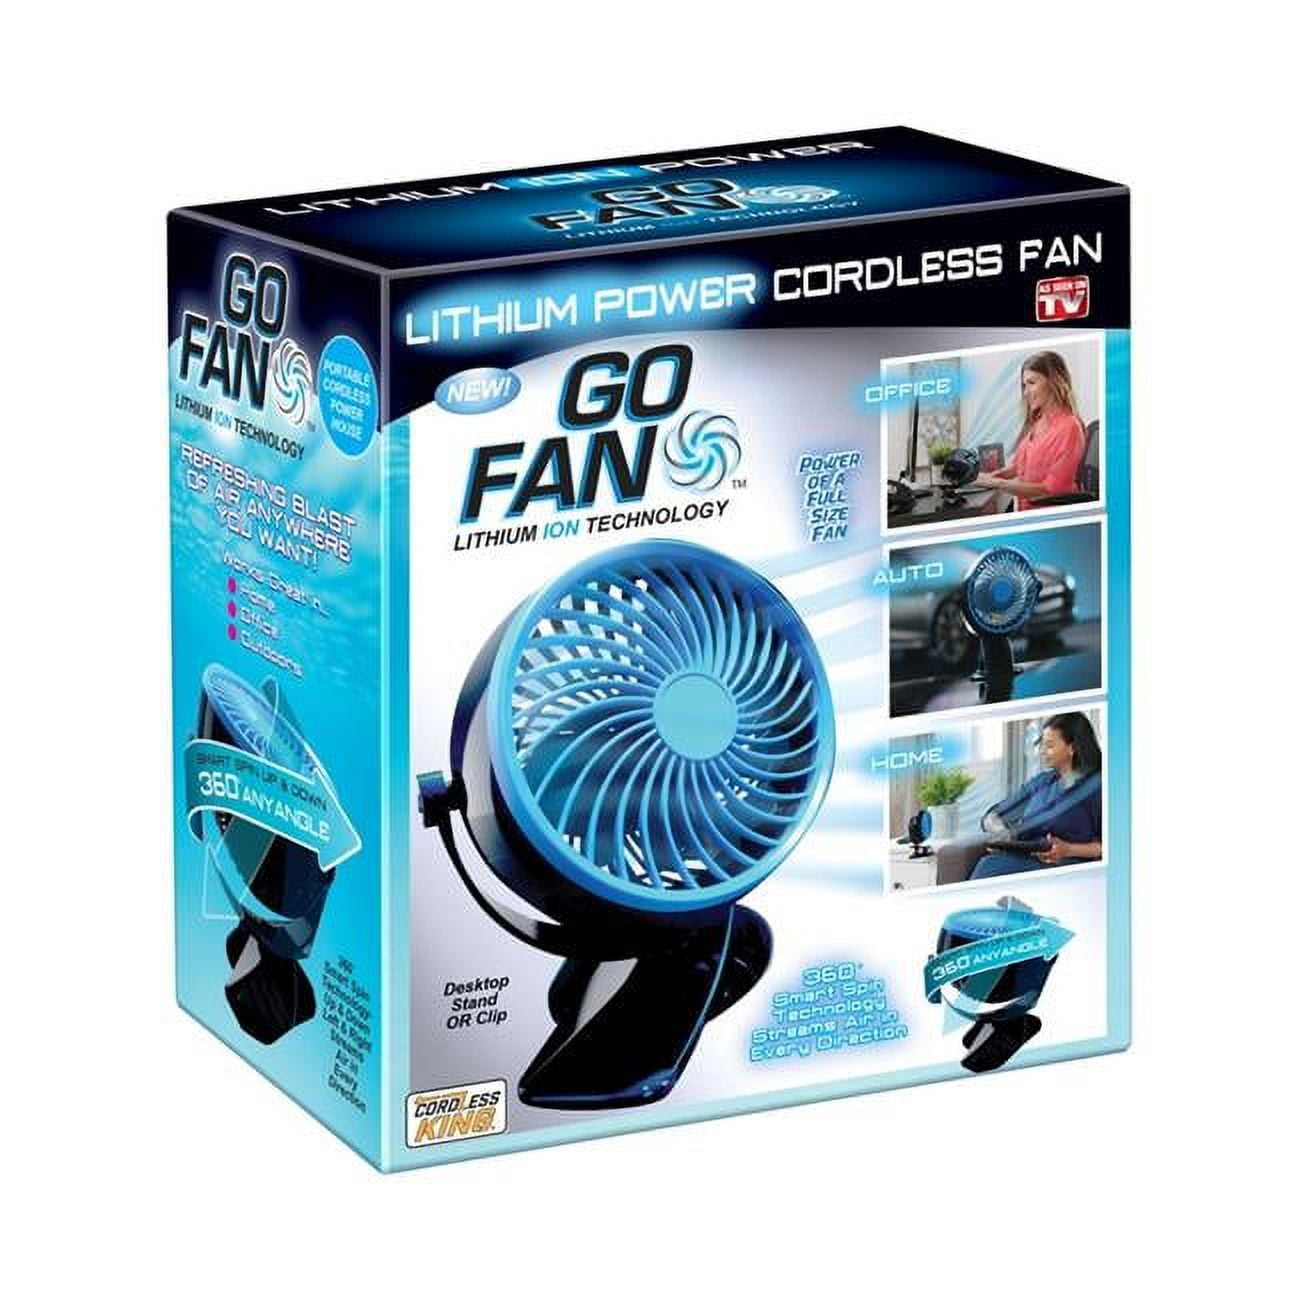 Mainstays Rechargeable Personal USB Fan with Wireless Charging Pad and Led  Lighting Teal 